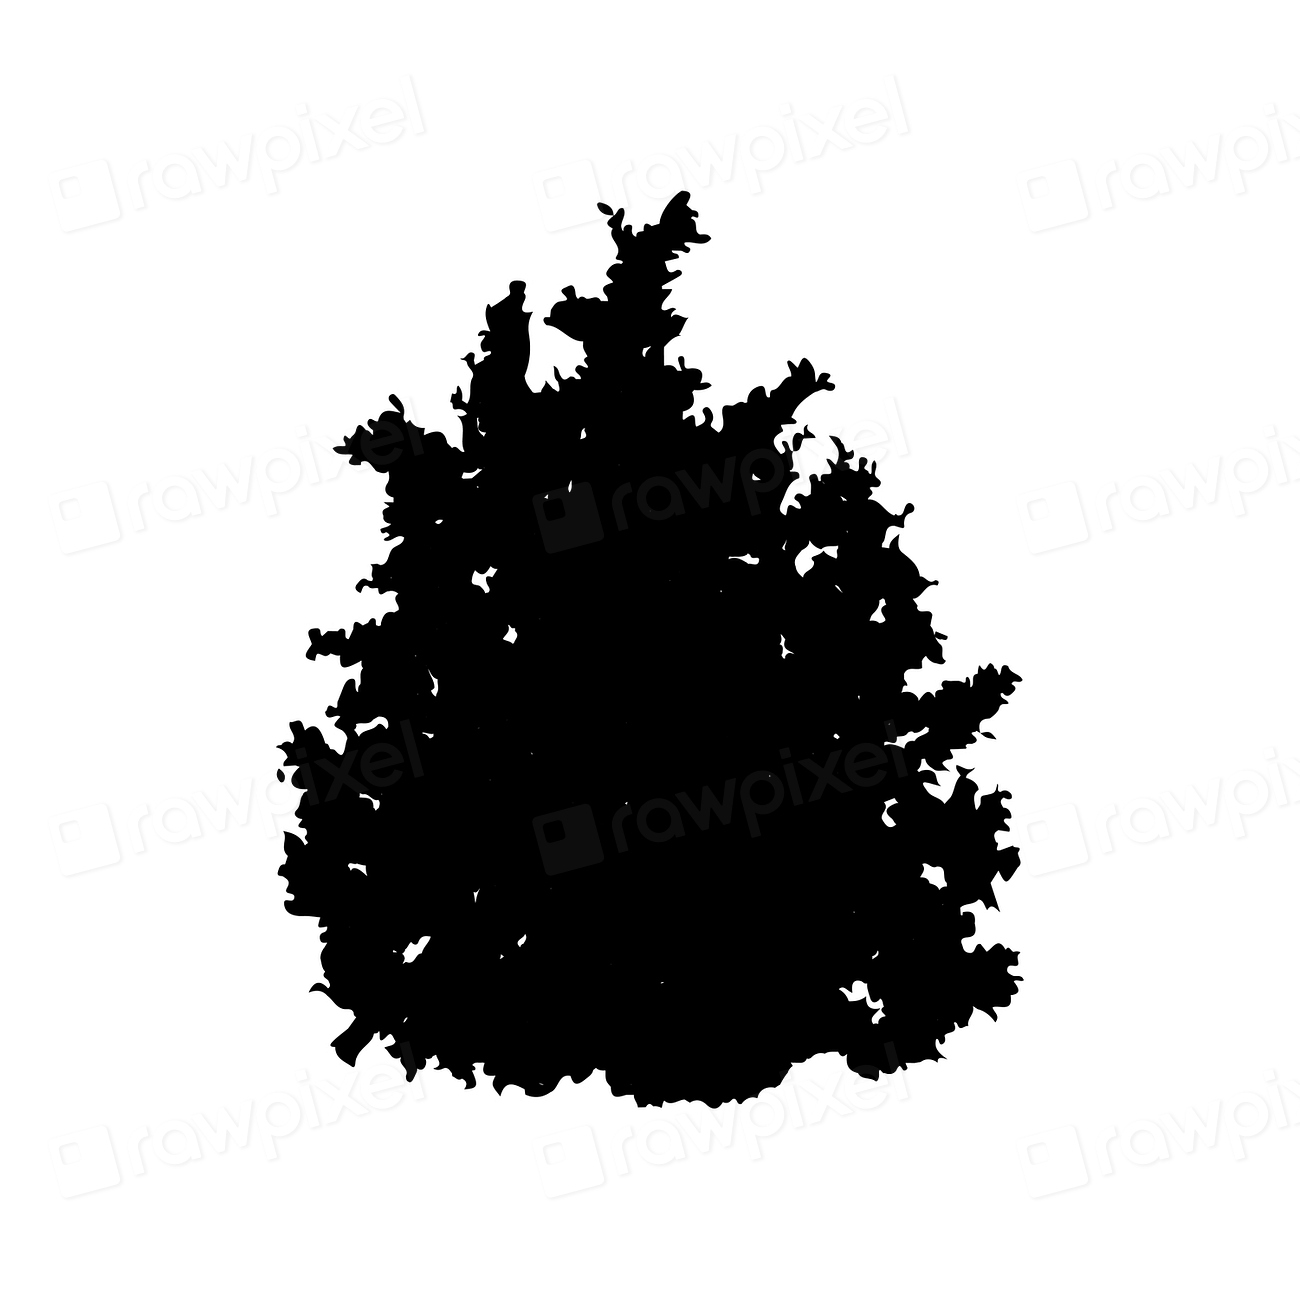 Bush Silhouette On White Background Free Vector Rawpixel